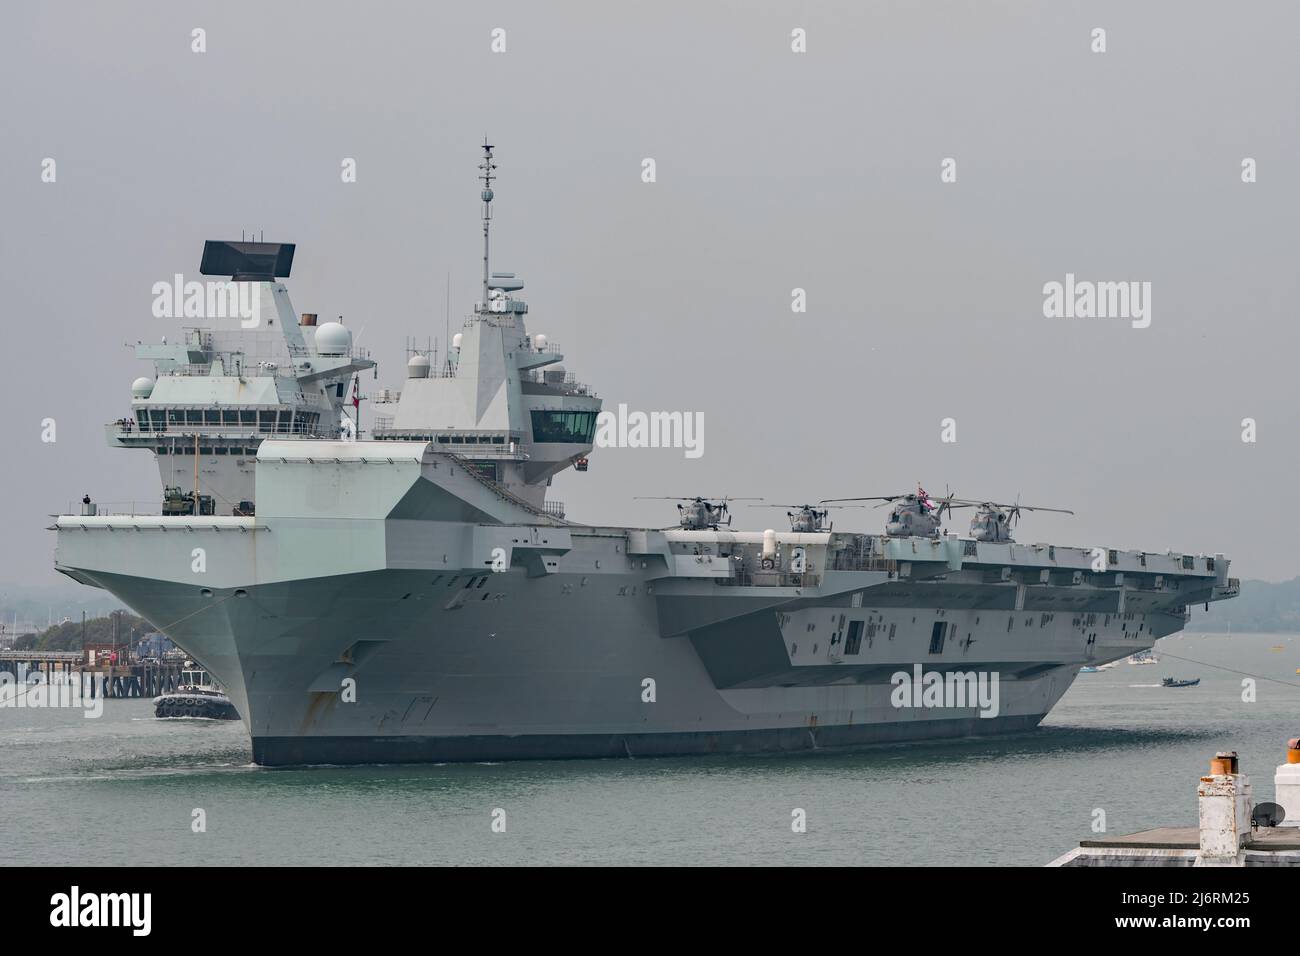 HMS Queen Elizabeth (R08) departed Portsmouth, UK on the 3rd May 2022 for sea training, with Merlin and Wildcat helicopters on deck. Stock Photo